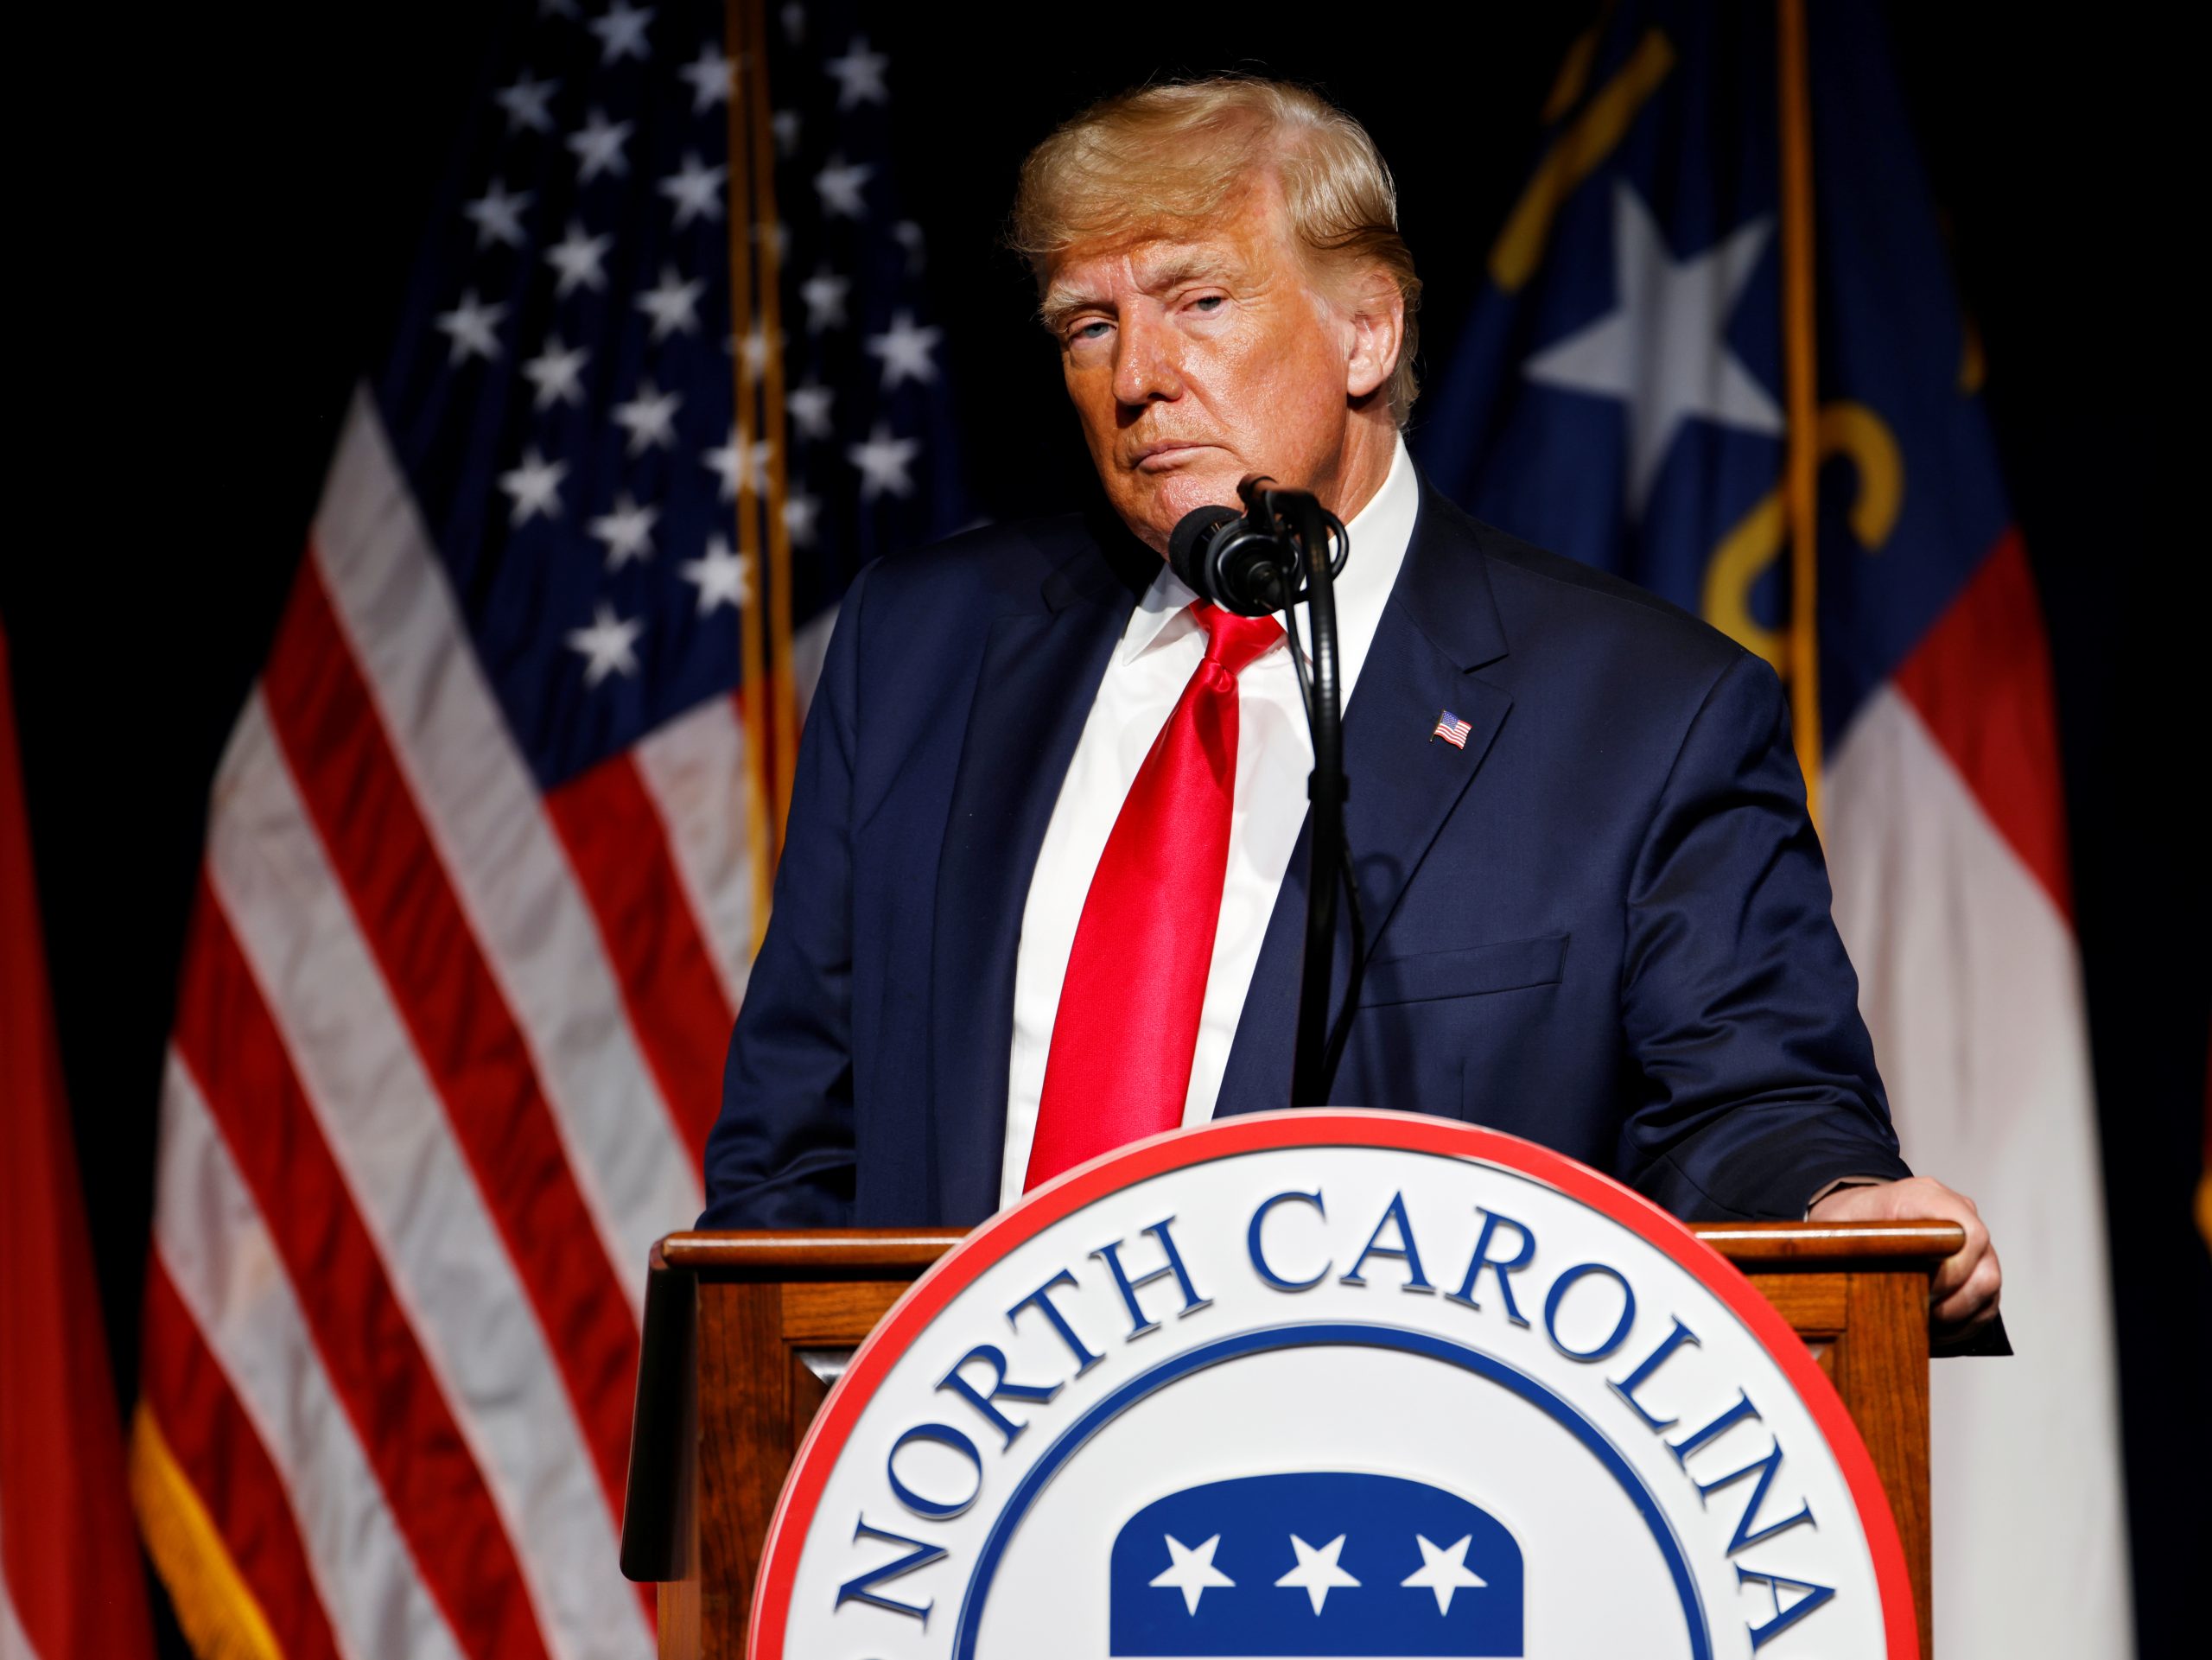 FILE PHOTO: Former U.S. President Donald Trump pauses while speaking at the North Carolina GOP convention dinner in Greenville